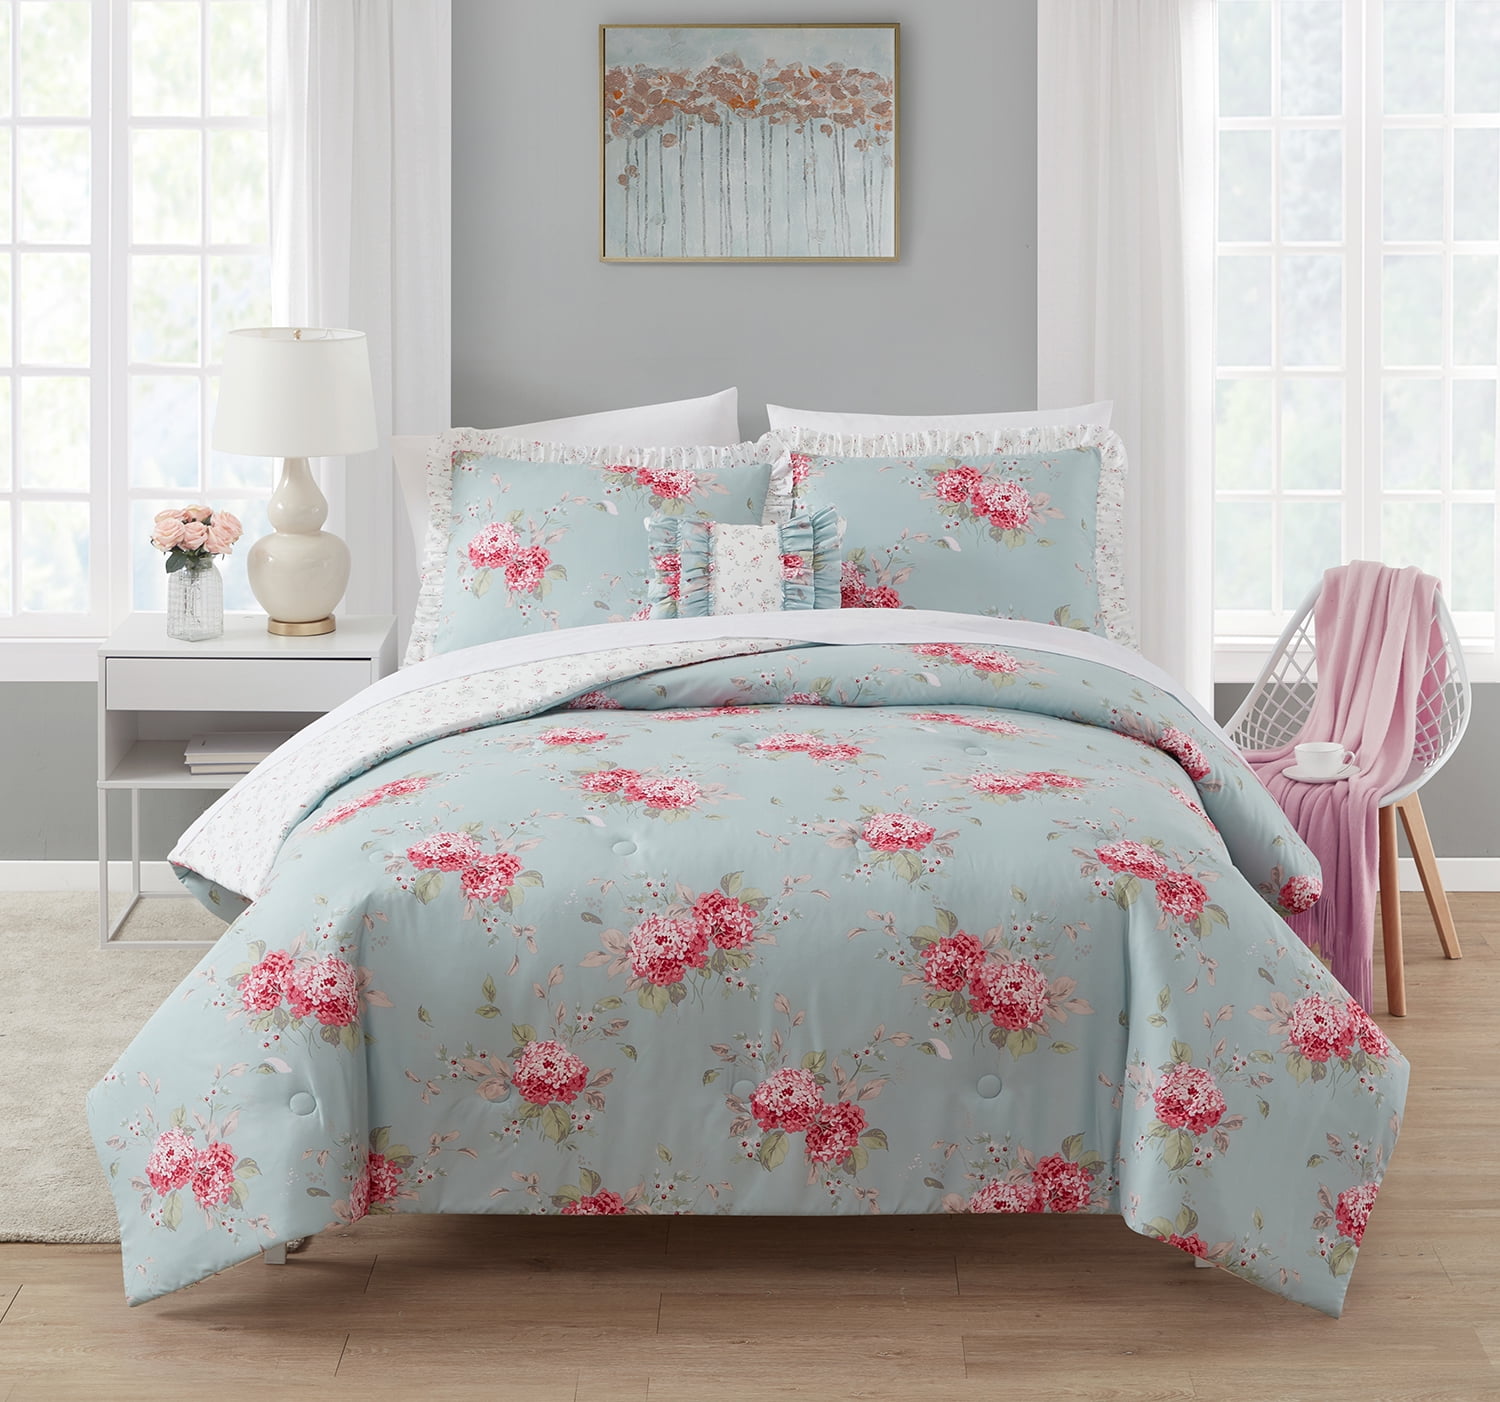 BEAUTIFUL COTTAGE CHIC BLUE WHITE COUNTRY FARMHOUSE ROSE FLORAL LEAF QUILT SET 